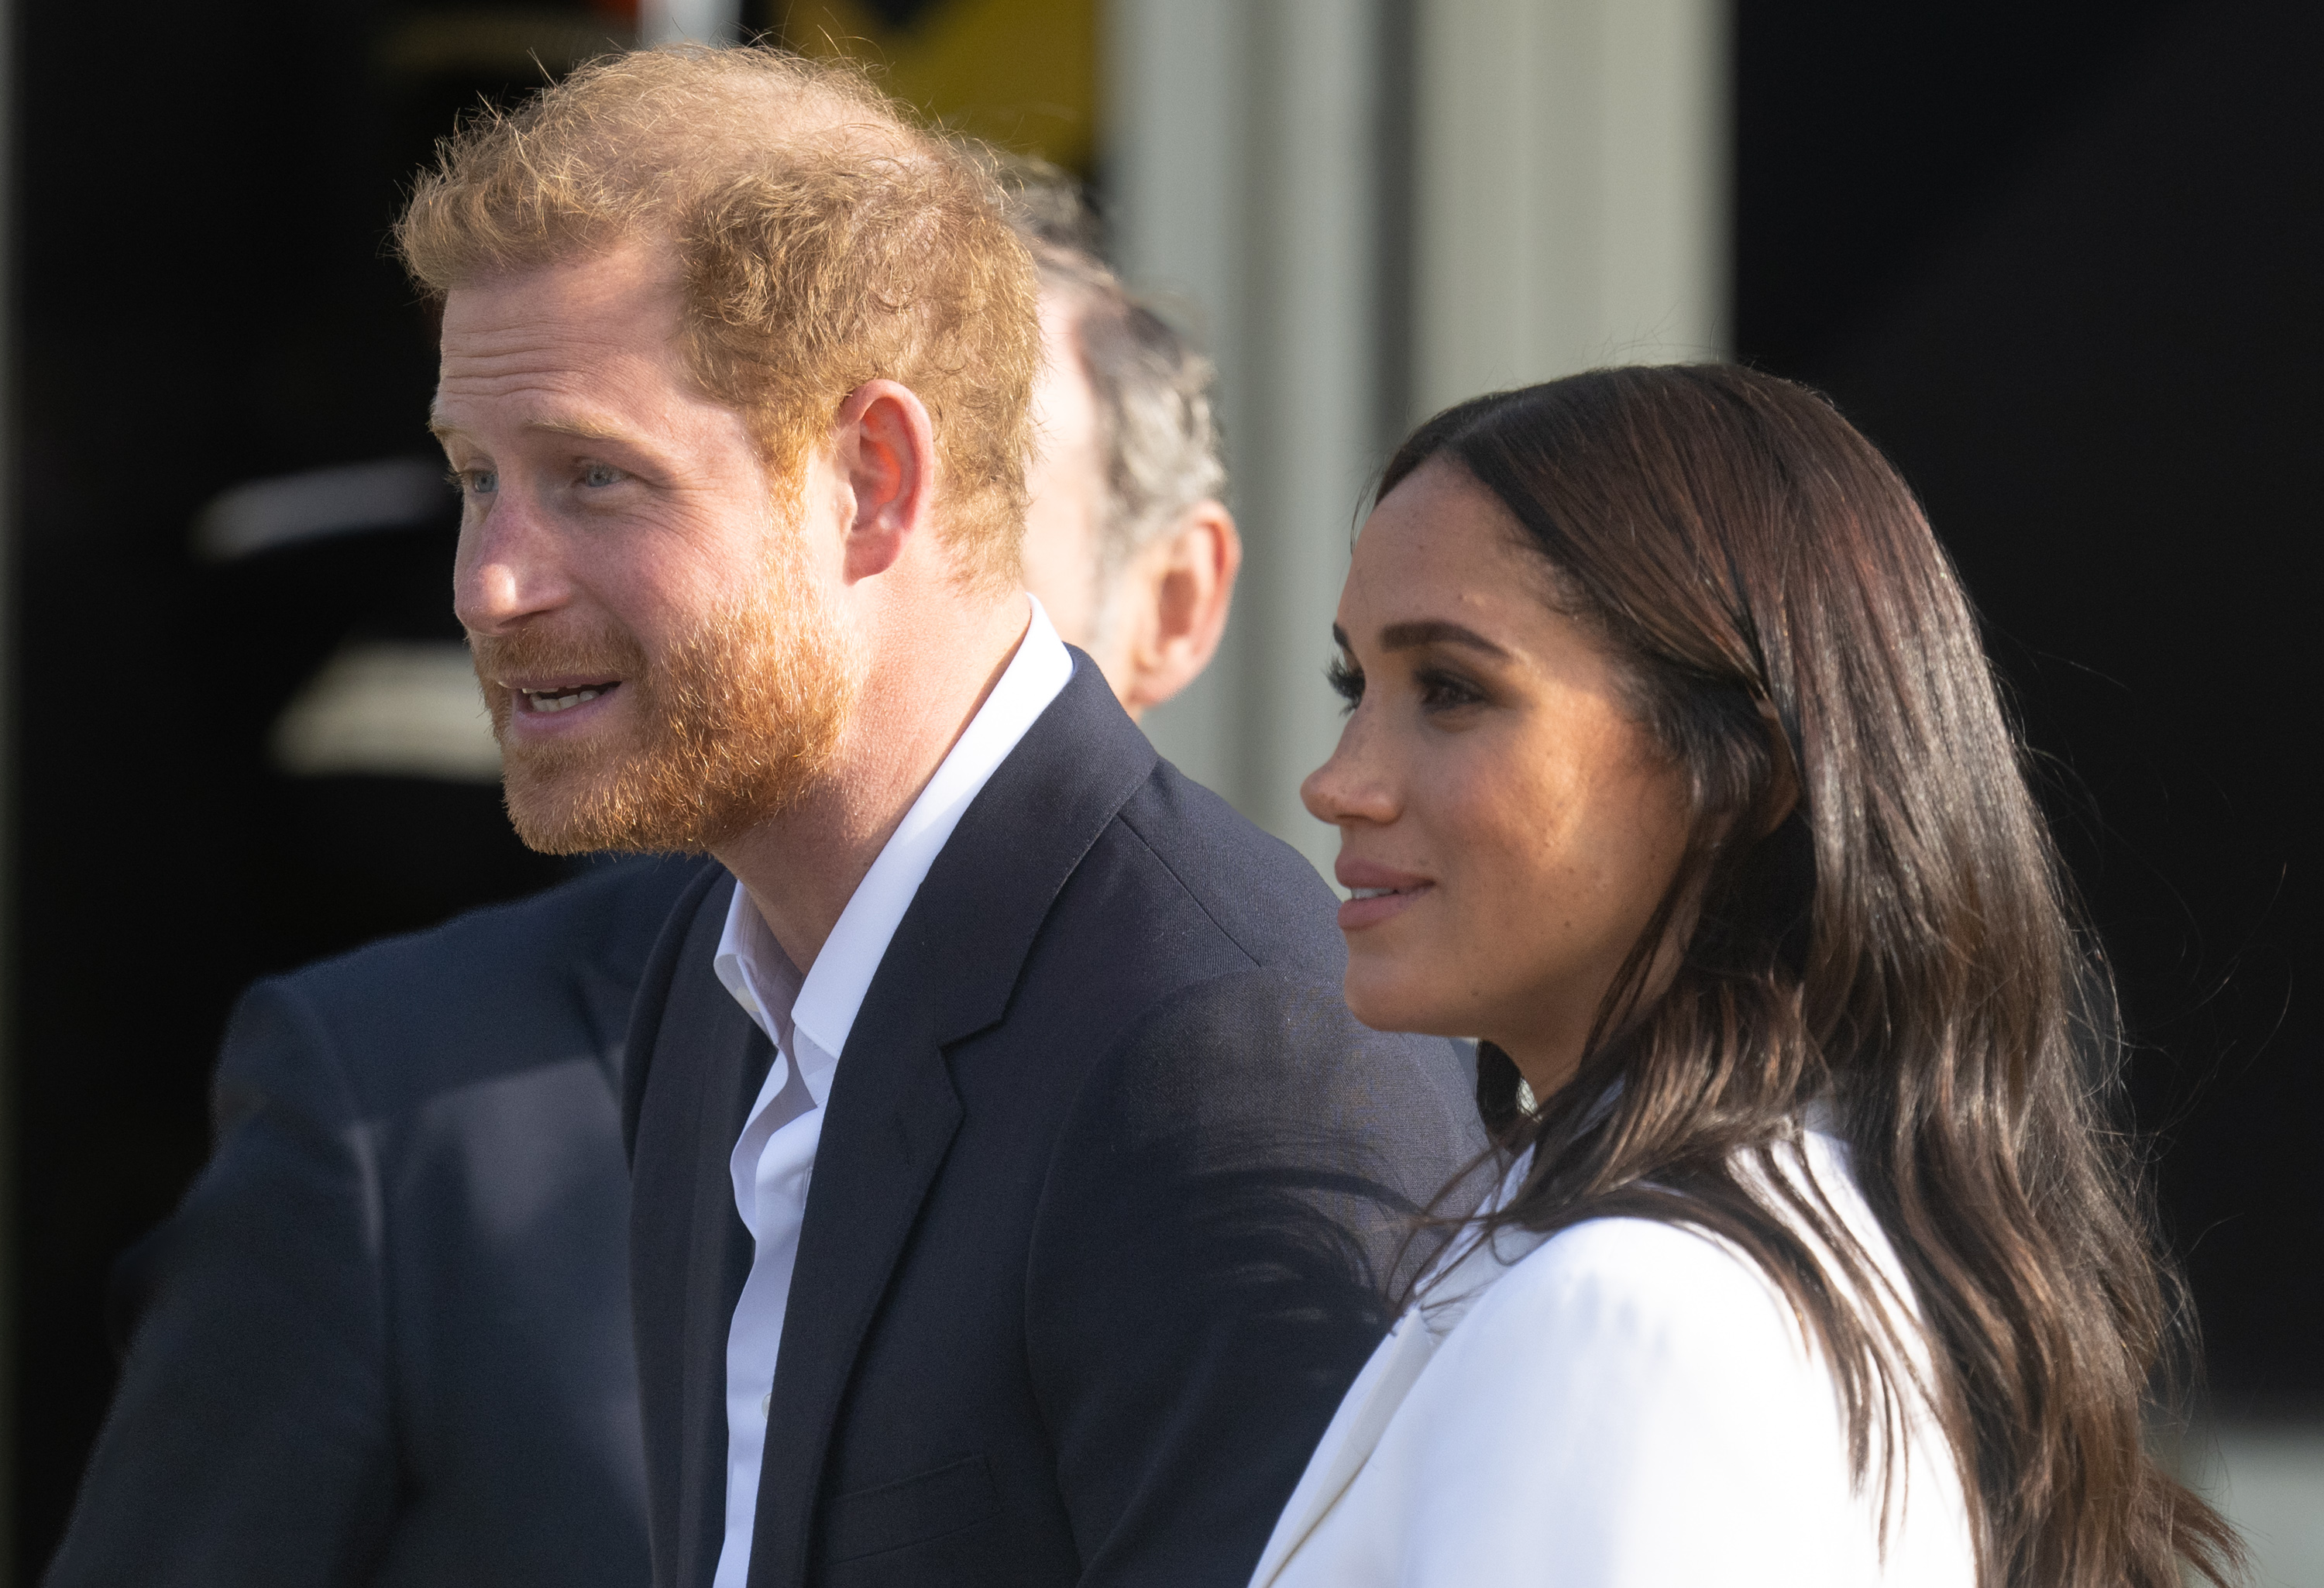 Prince Harry and Meghan Markle attend a reception for friends and family of competitors of the Invictus Games at Nations Home at Zuiderpark on April 15, 2022, in The Hague, Netherlands. | Source: Getty Images